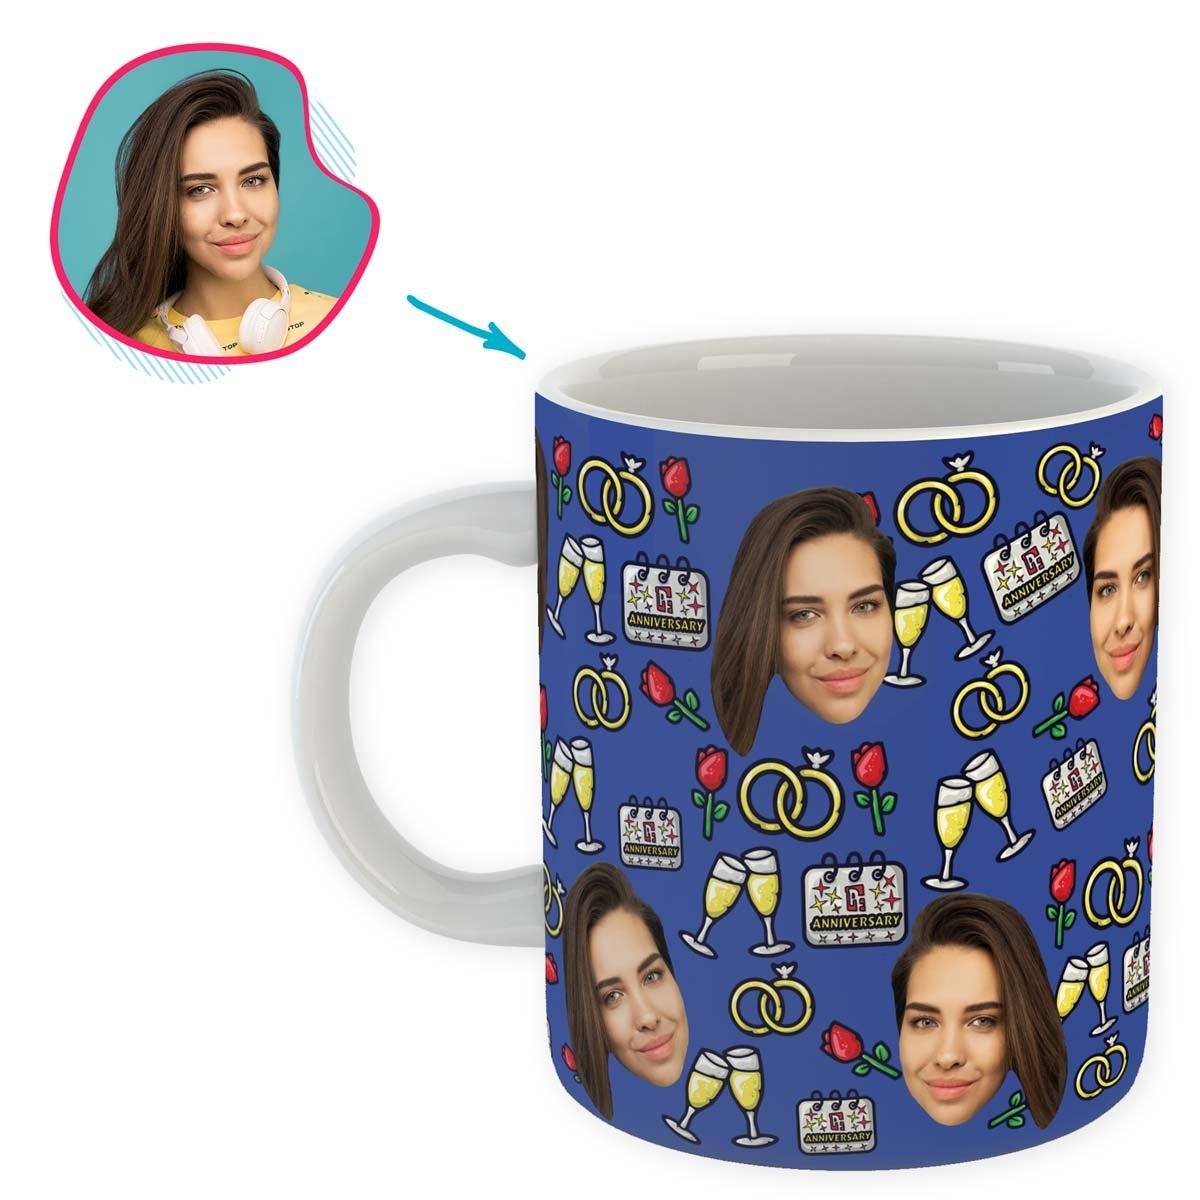 Darkblue Anniversary personalized mug with photo of face printed on it